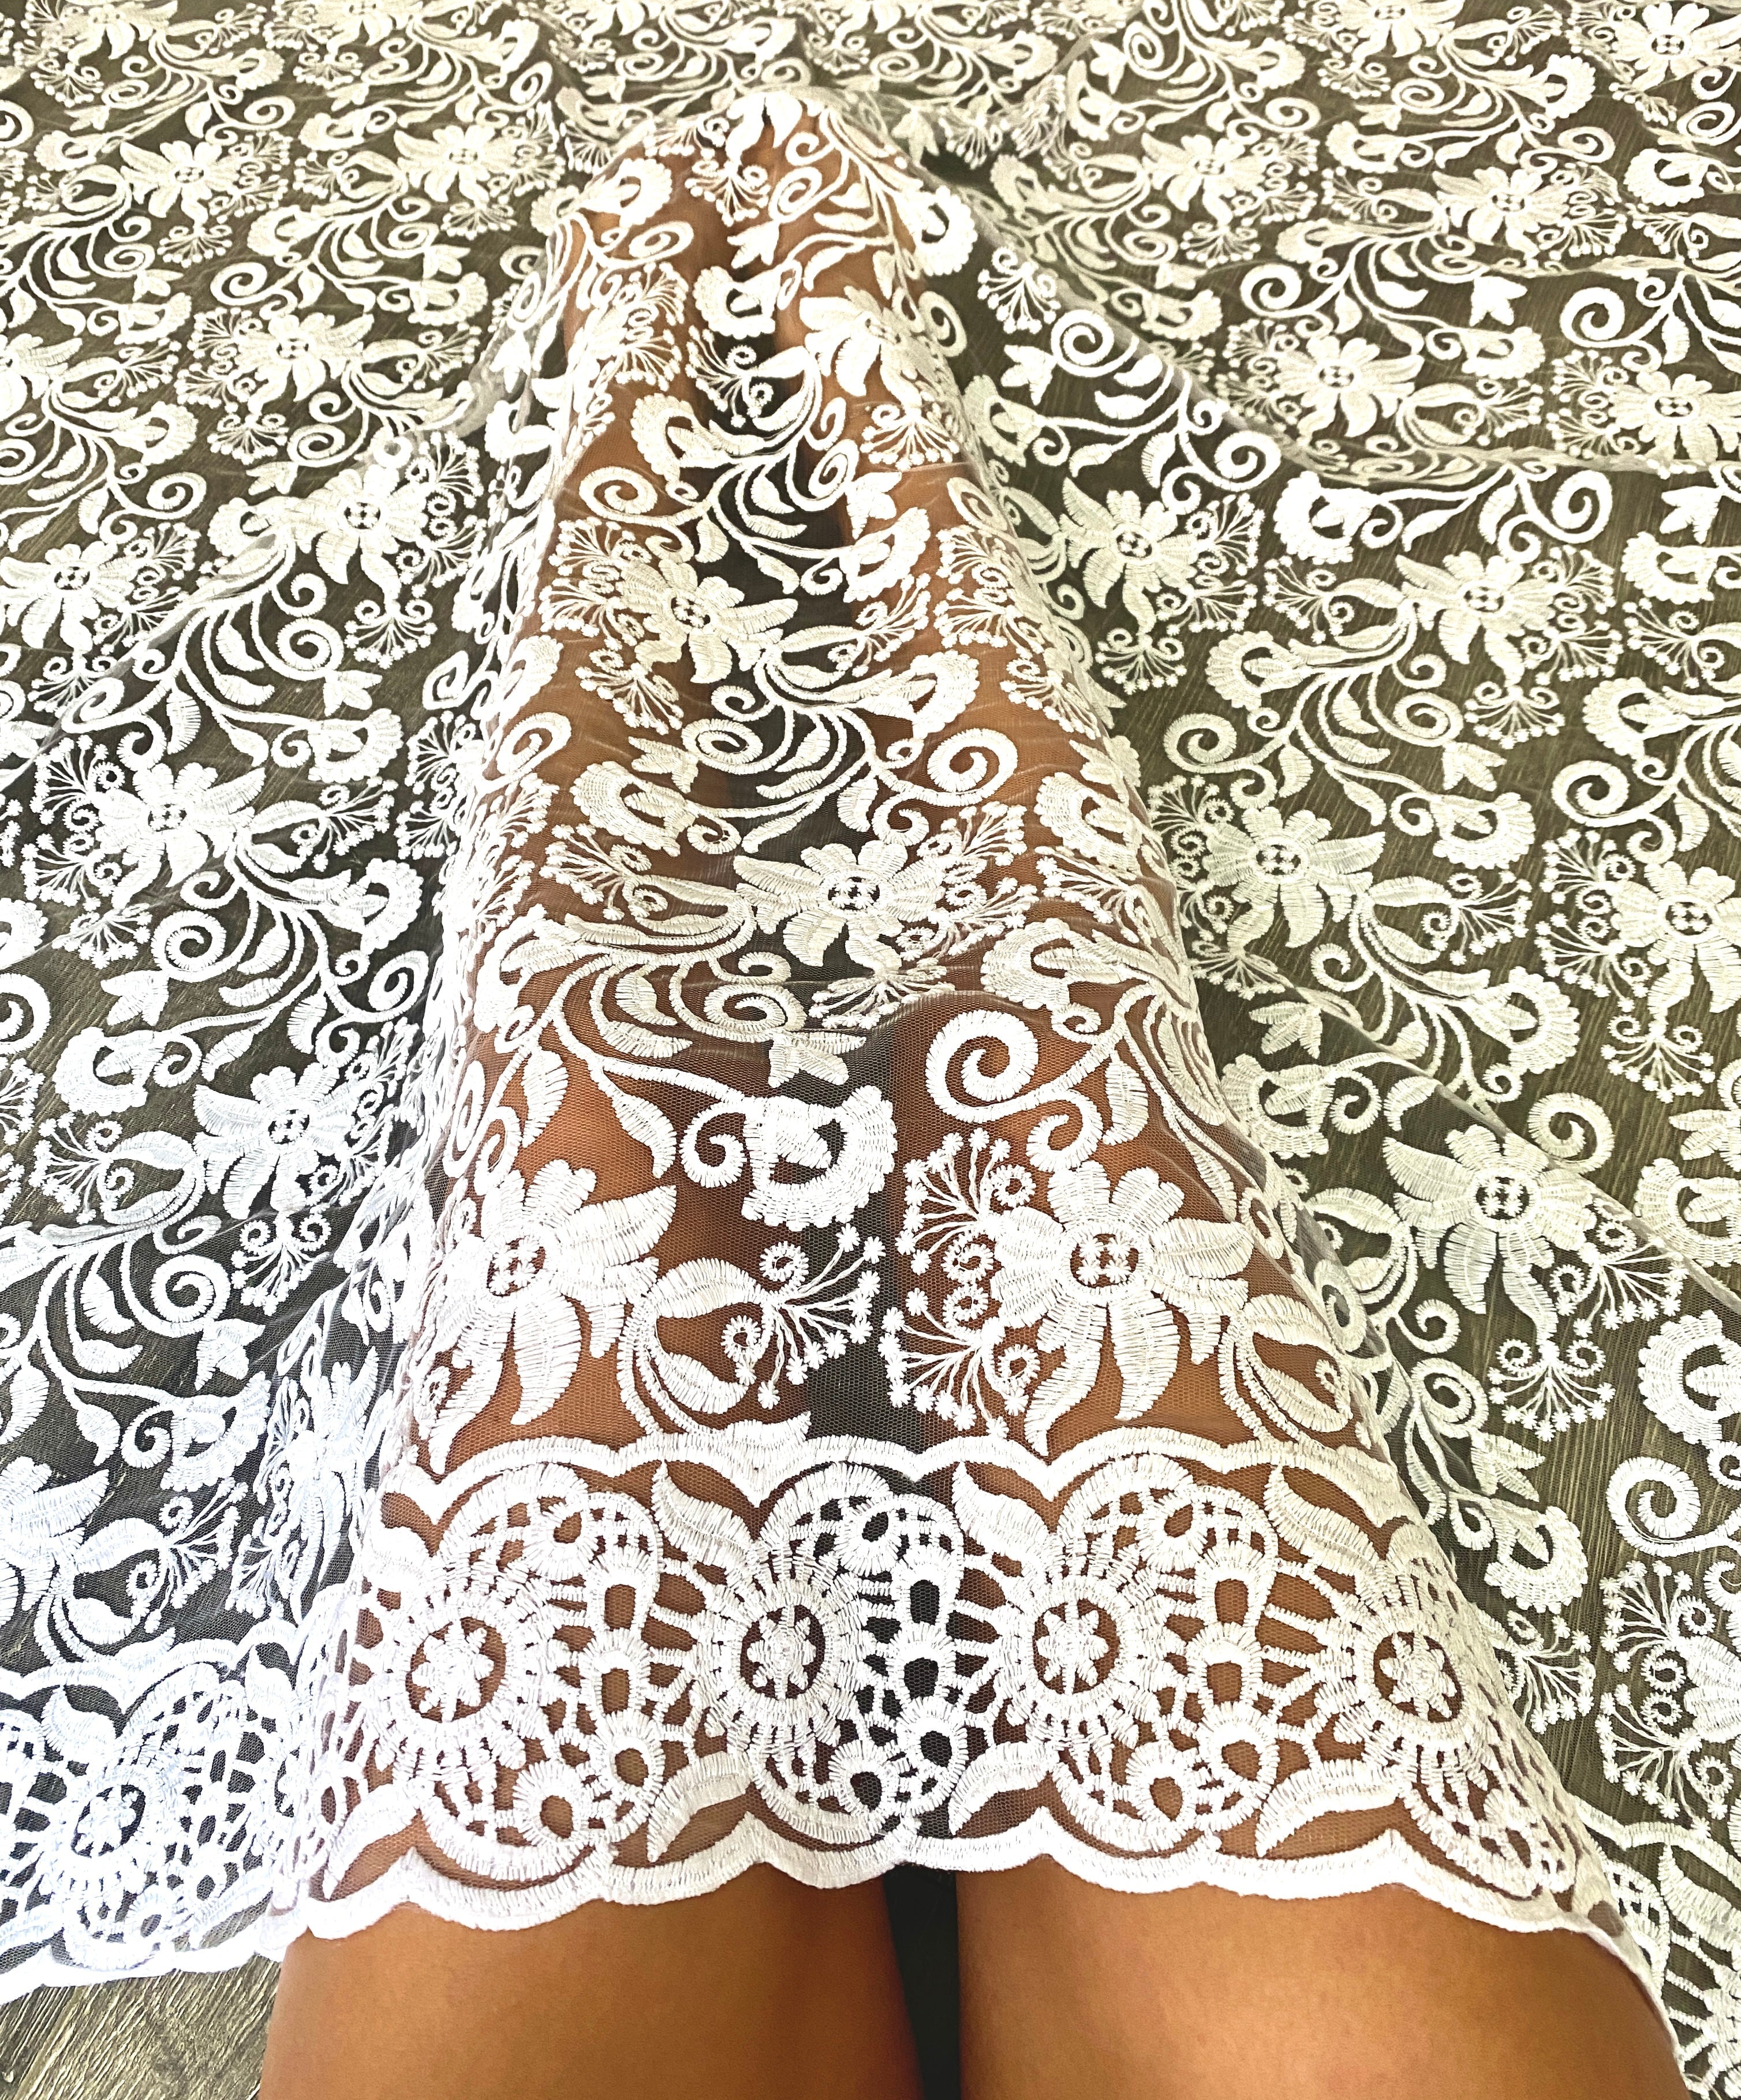 white Embroidered Lace, multicolor Embroidered Lace, embroidered Lace, Embroidered Lace for woman, Embroidered Lace for bride, Embroidered Lace in low price, Embroidered Lace on sale, premium Embroidered Lace